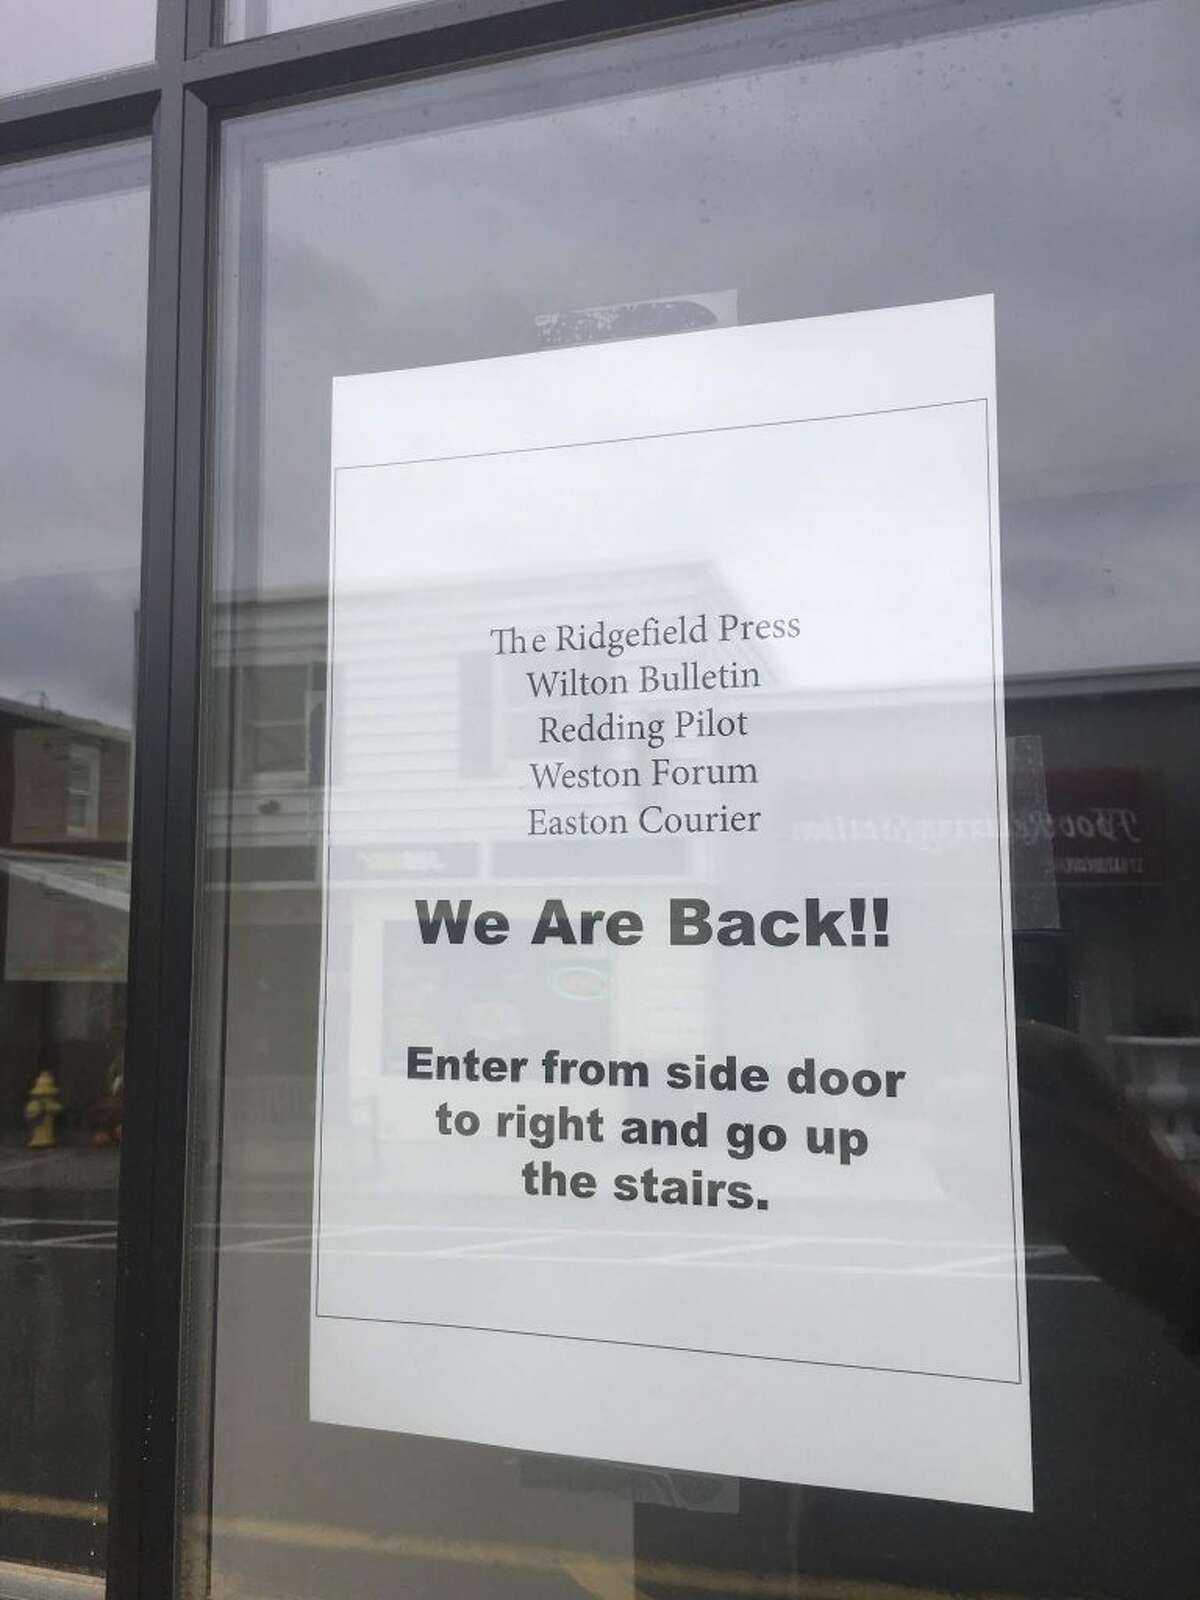 After first-floor construction this summer, The Ridgefield Press office on Bailey Avenue is open. The staff is located on the second floor of the building. Guests are urged to use the building's side entrance.